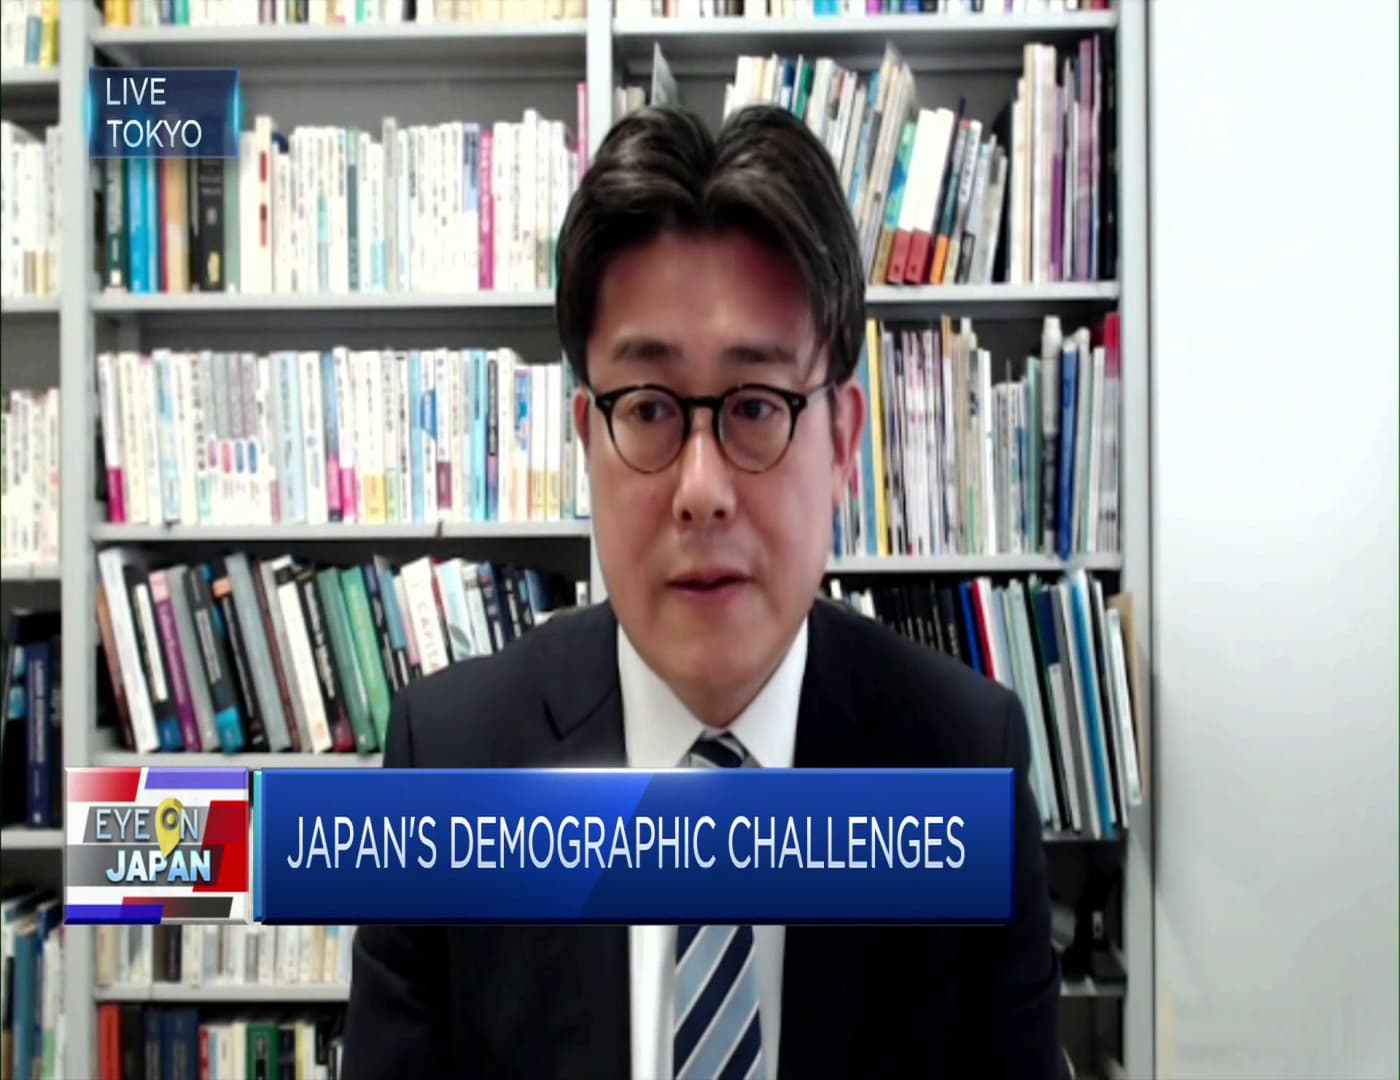 there-s-no-easy-fix-for-japan-s-declining-birth-rate-says-professor